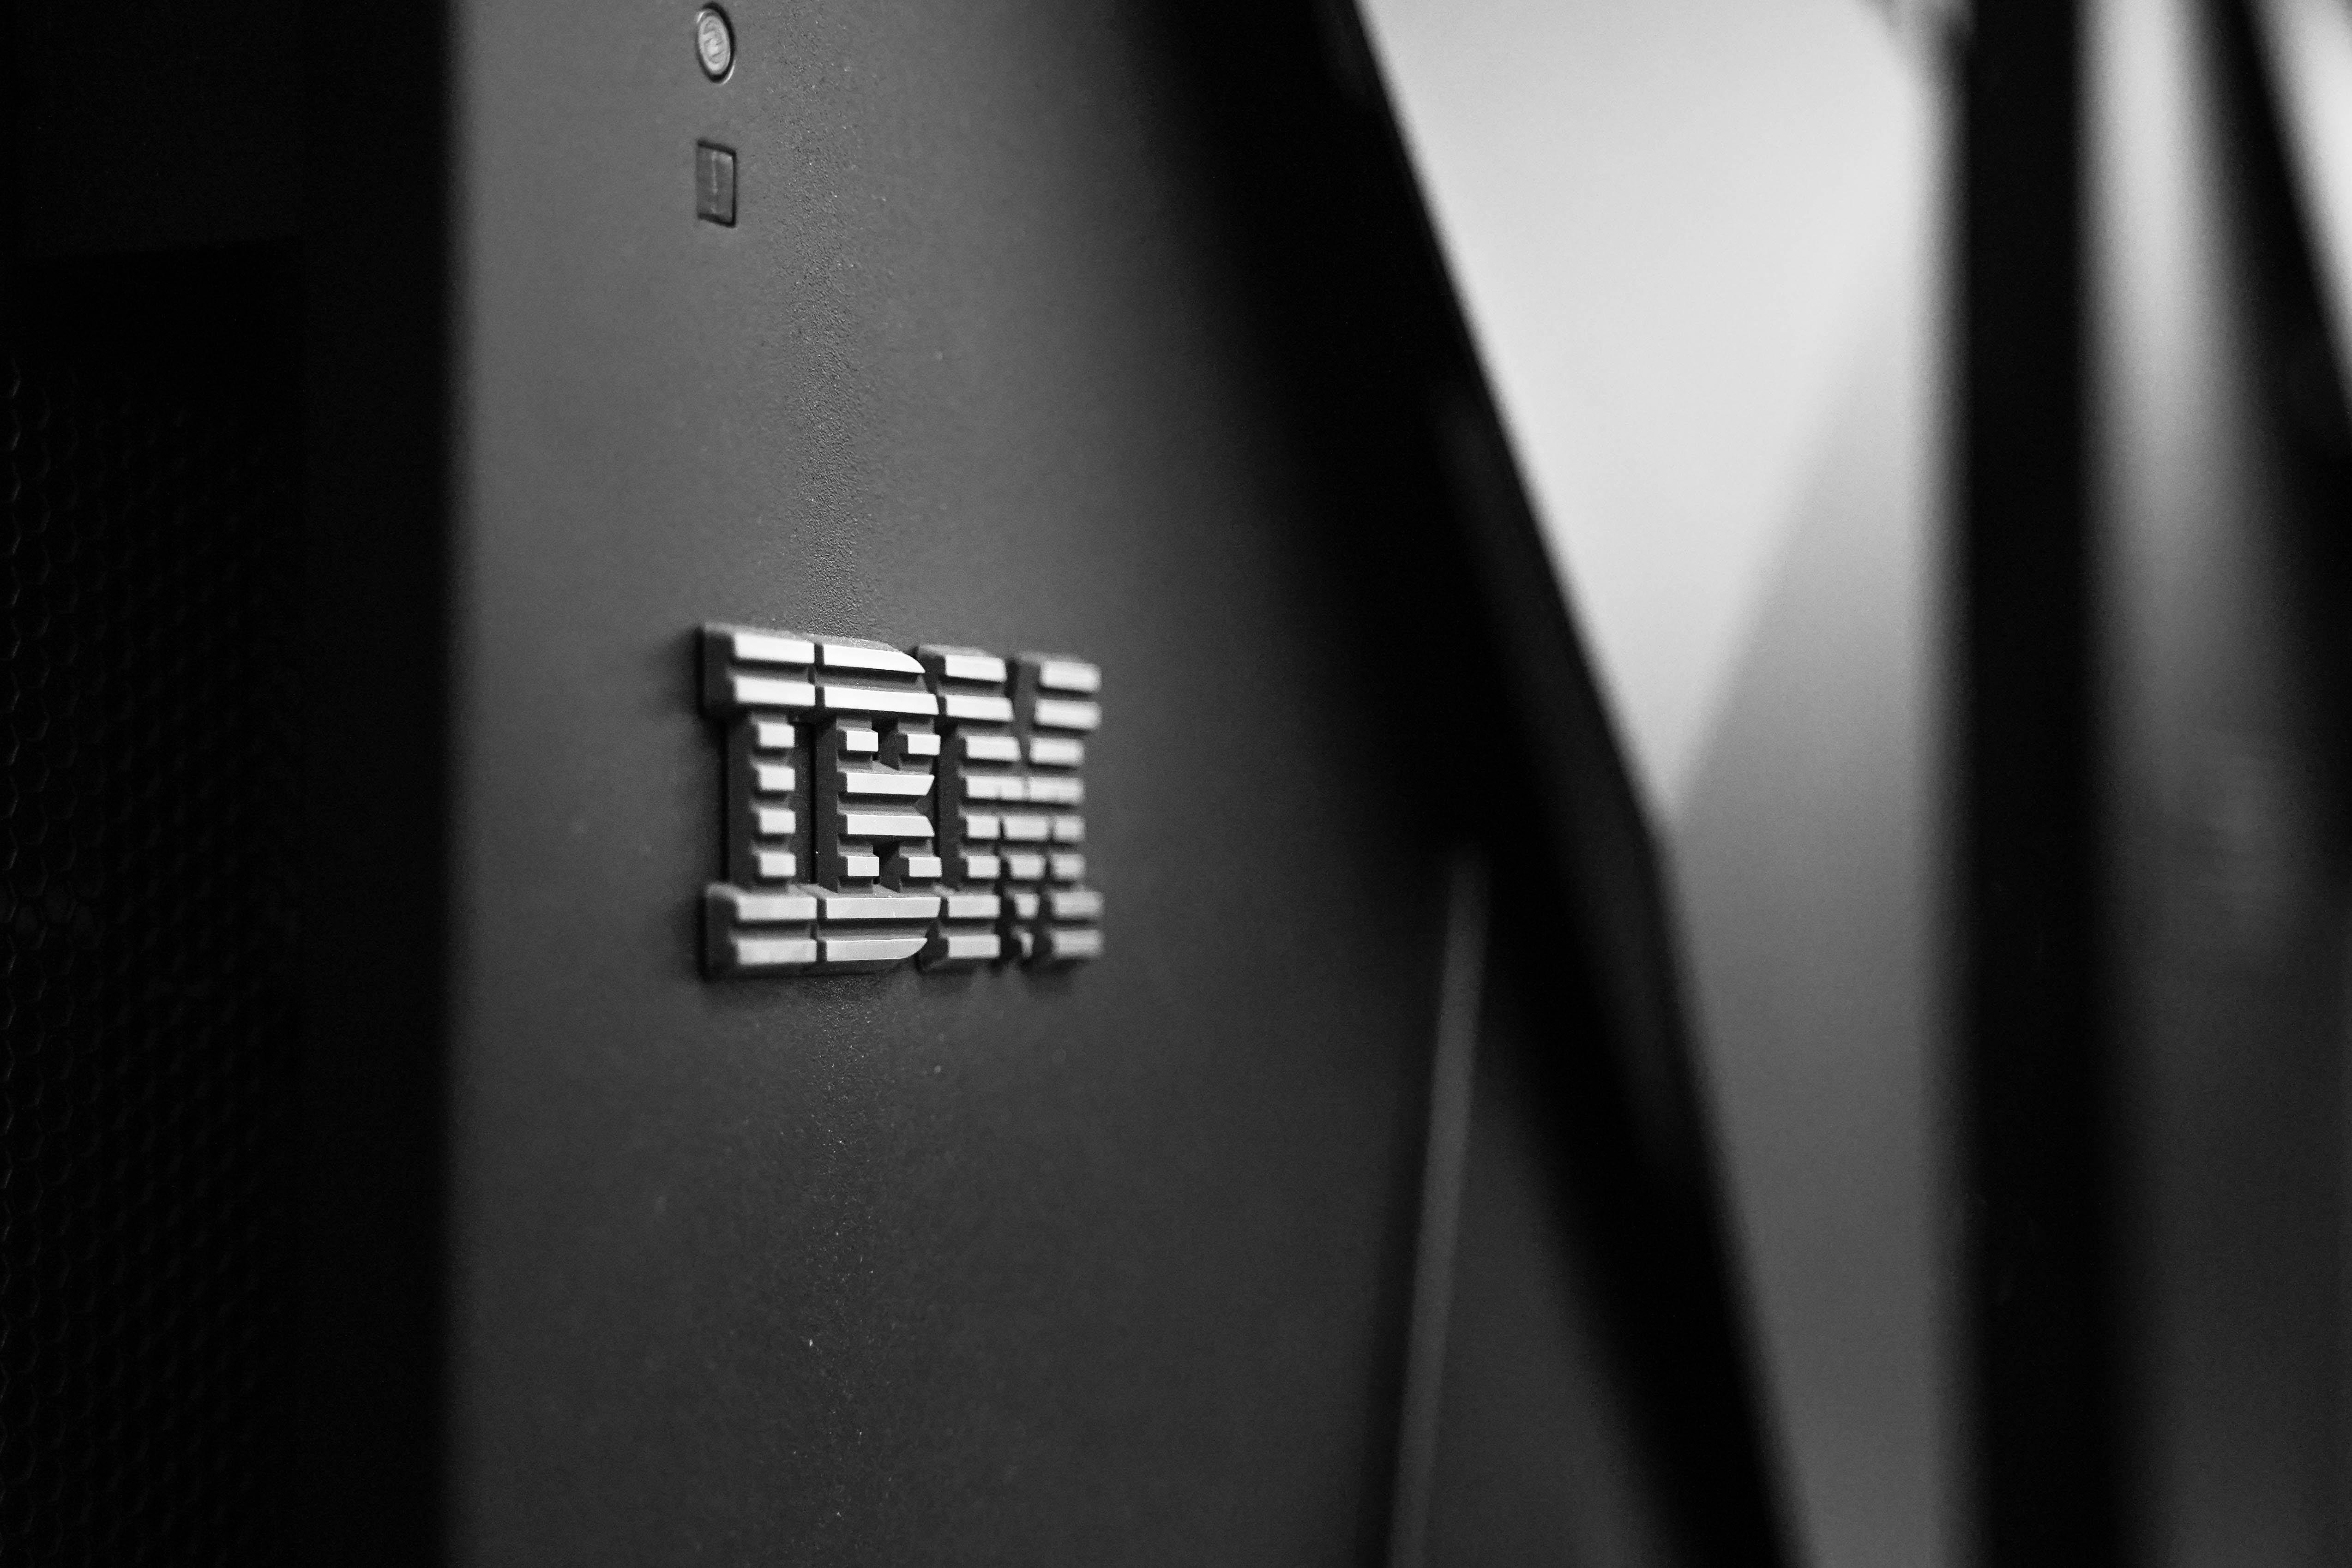 IBM Might Slow Down Its Dividends To Remain Competitive (NYSEIBM